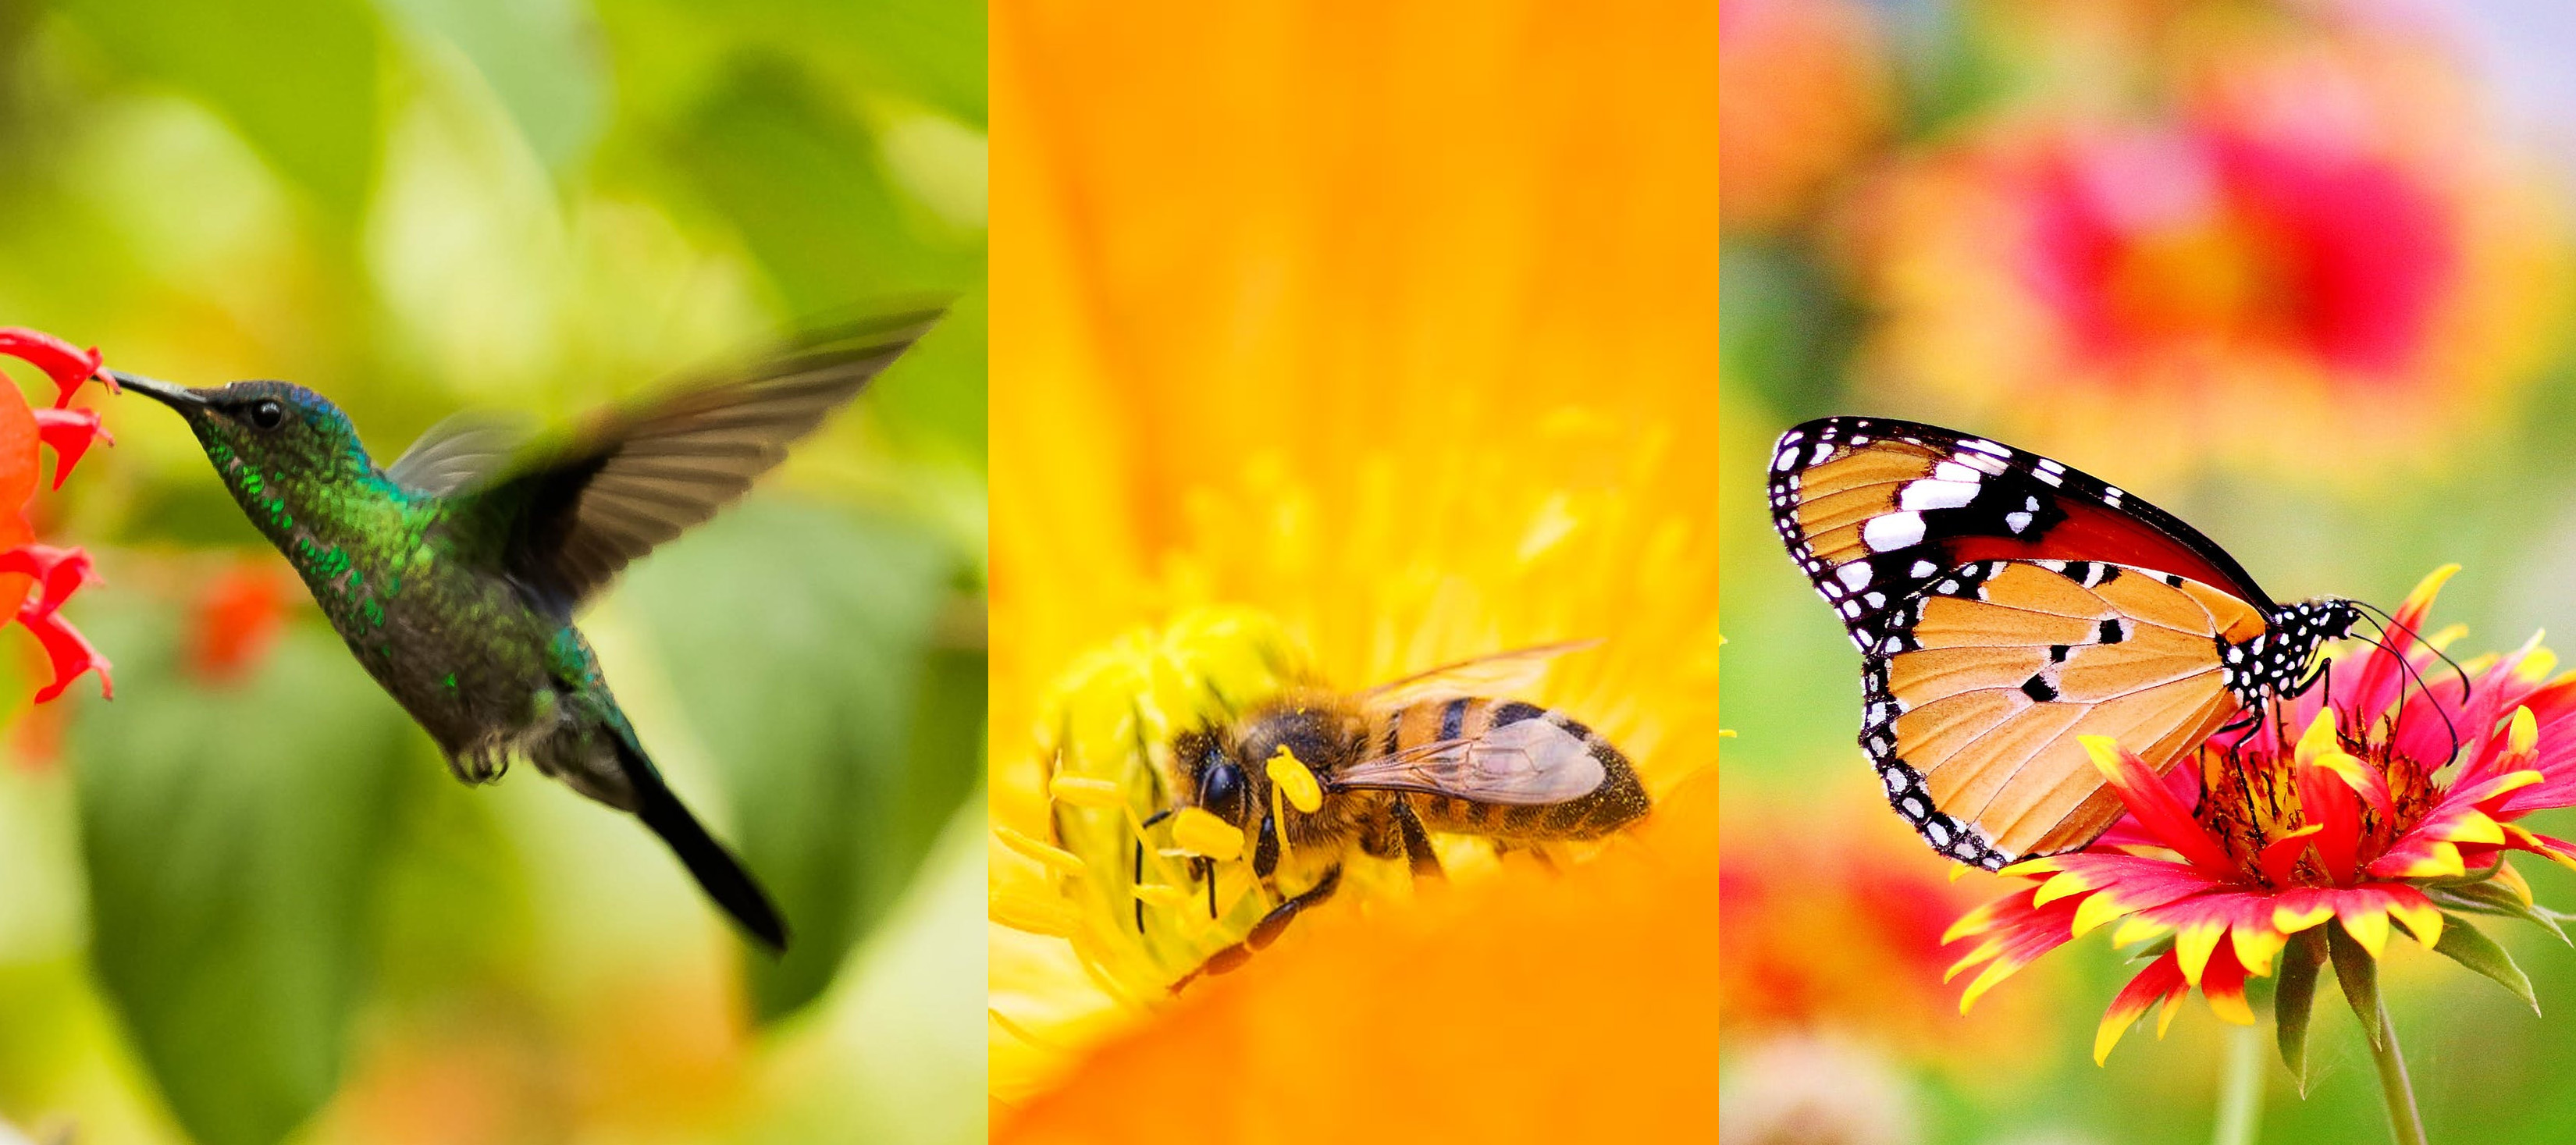 Planting for Pollinators - Bees, Butterflies, and ...